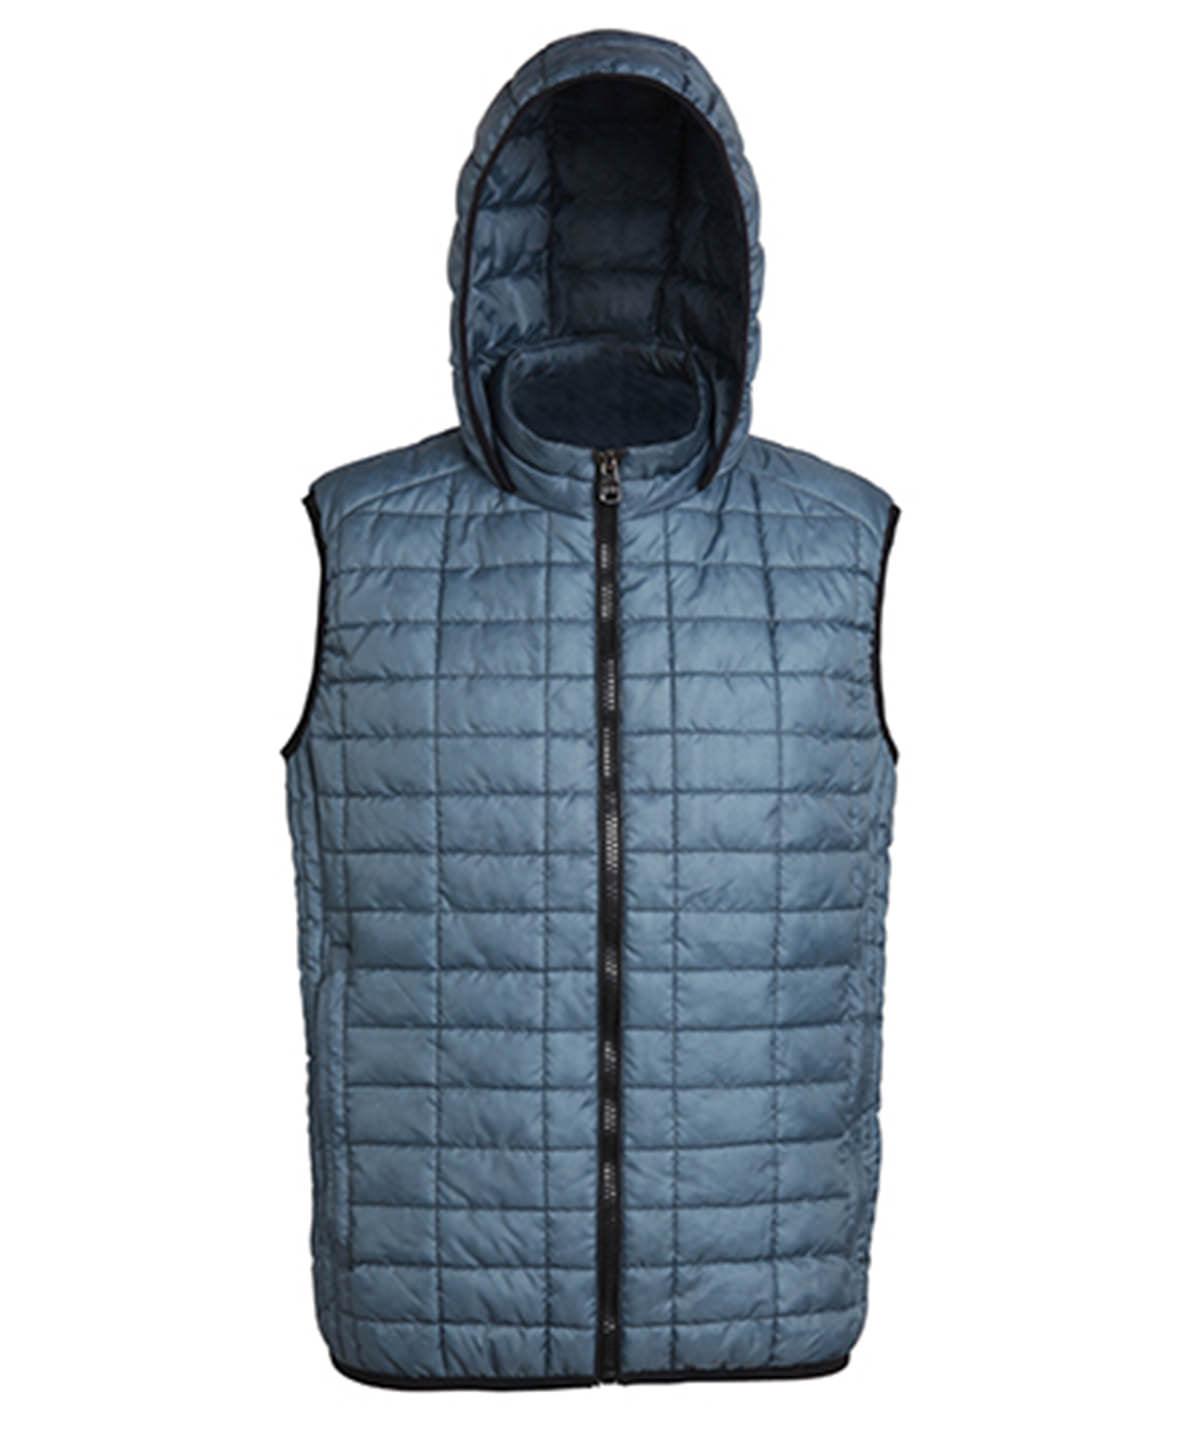 Steel* - Honeycomb hooded gilet Body Warmers 2786 Gilets and Bodywarmers, Jackets & Coats, Outdoor Dining, Padded & Insulation, Padded Perfection, Plus Sizes, Raladeal - Recently Added, Rebrandable Schoolwear Centres